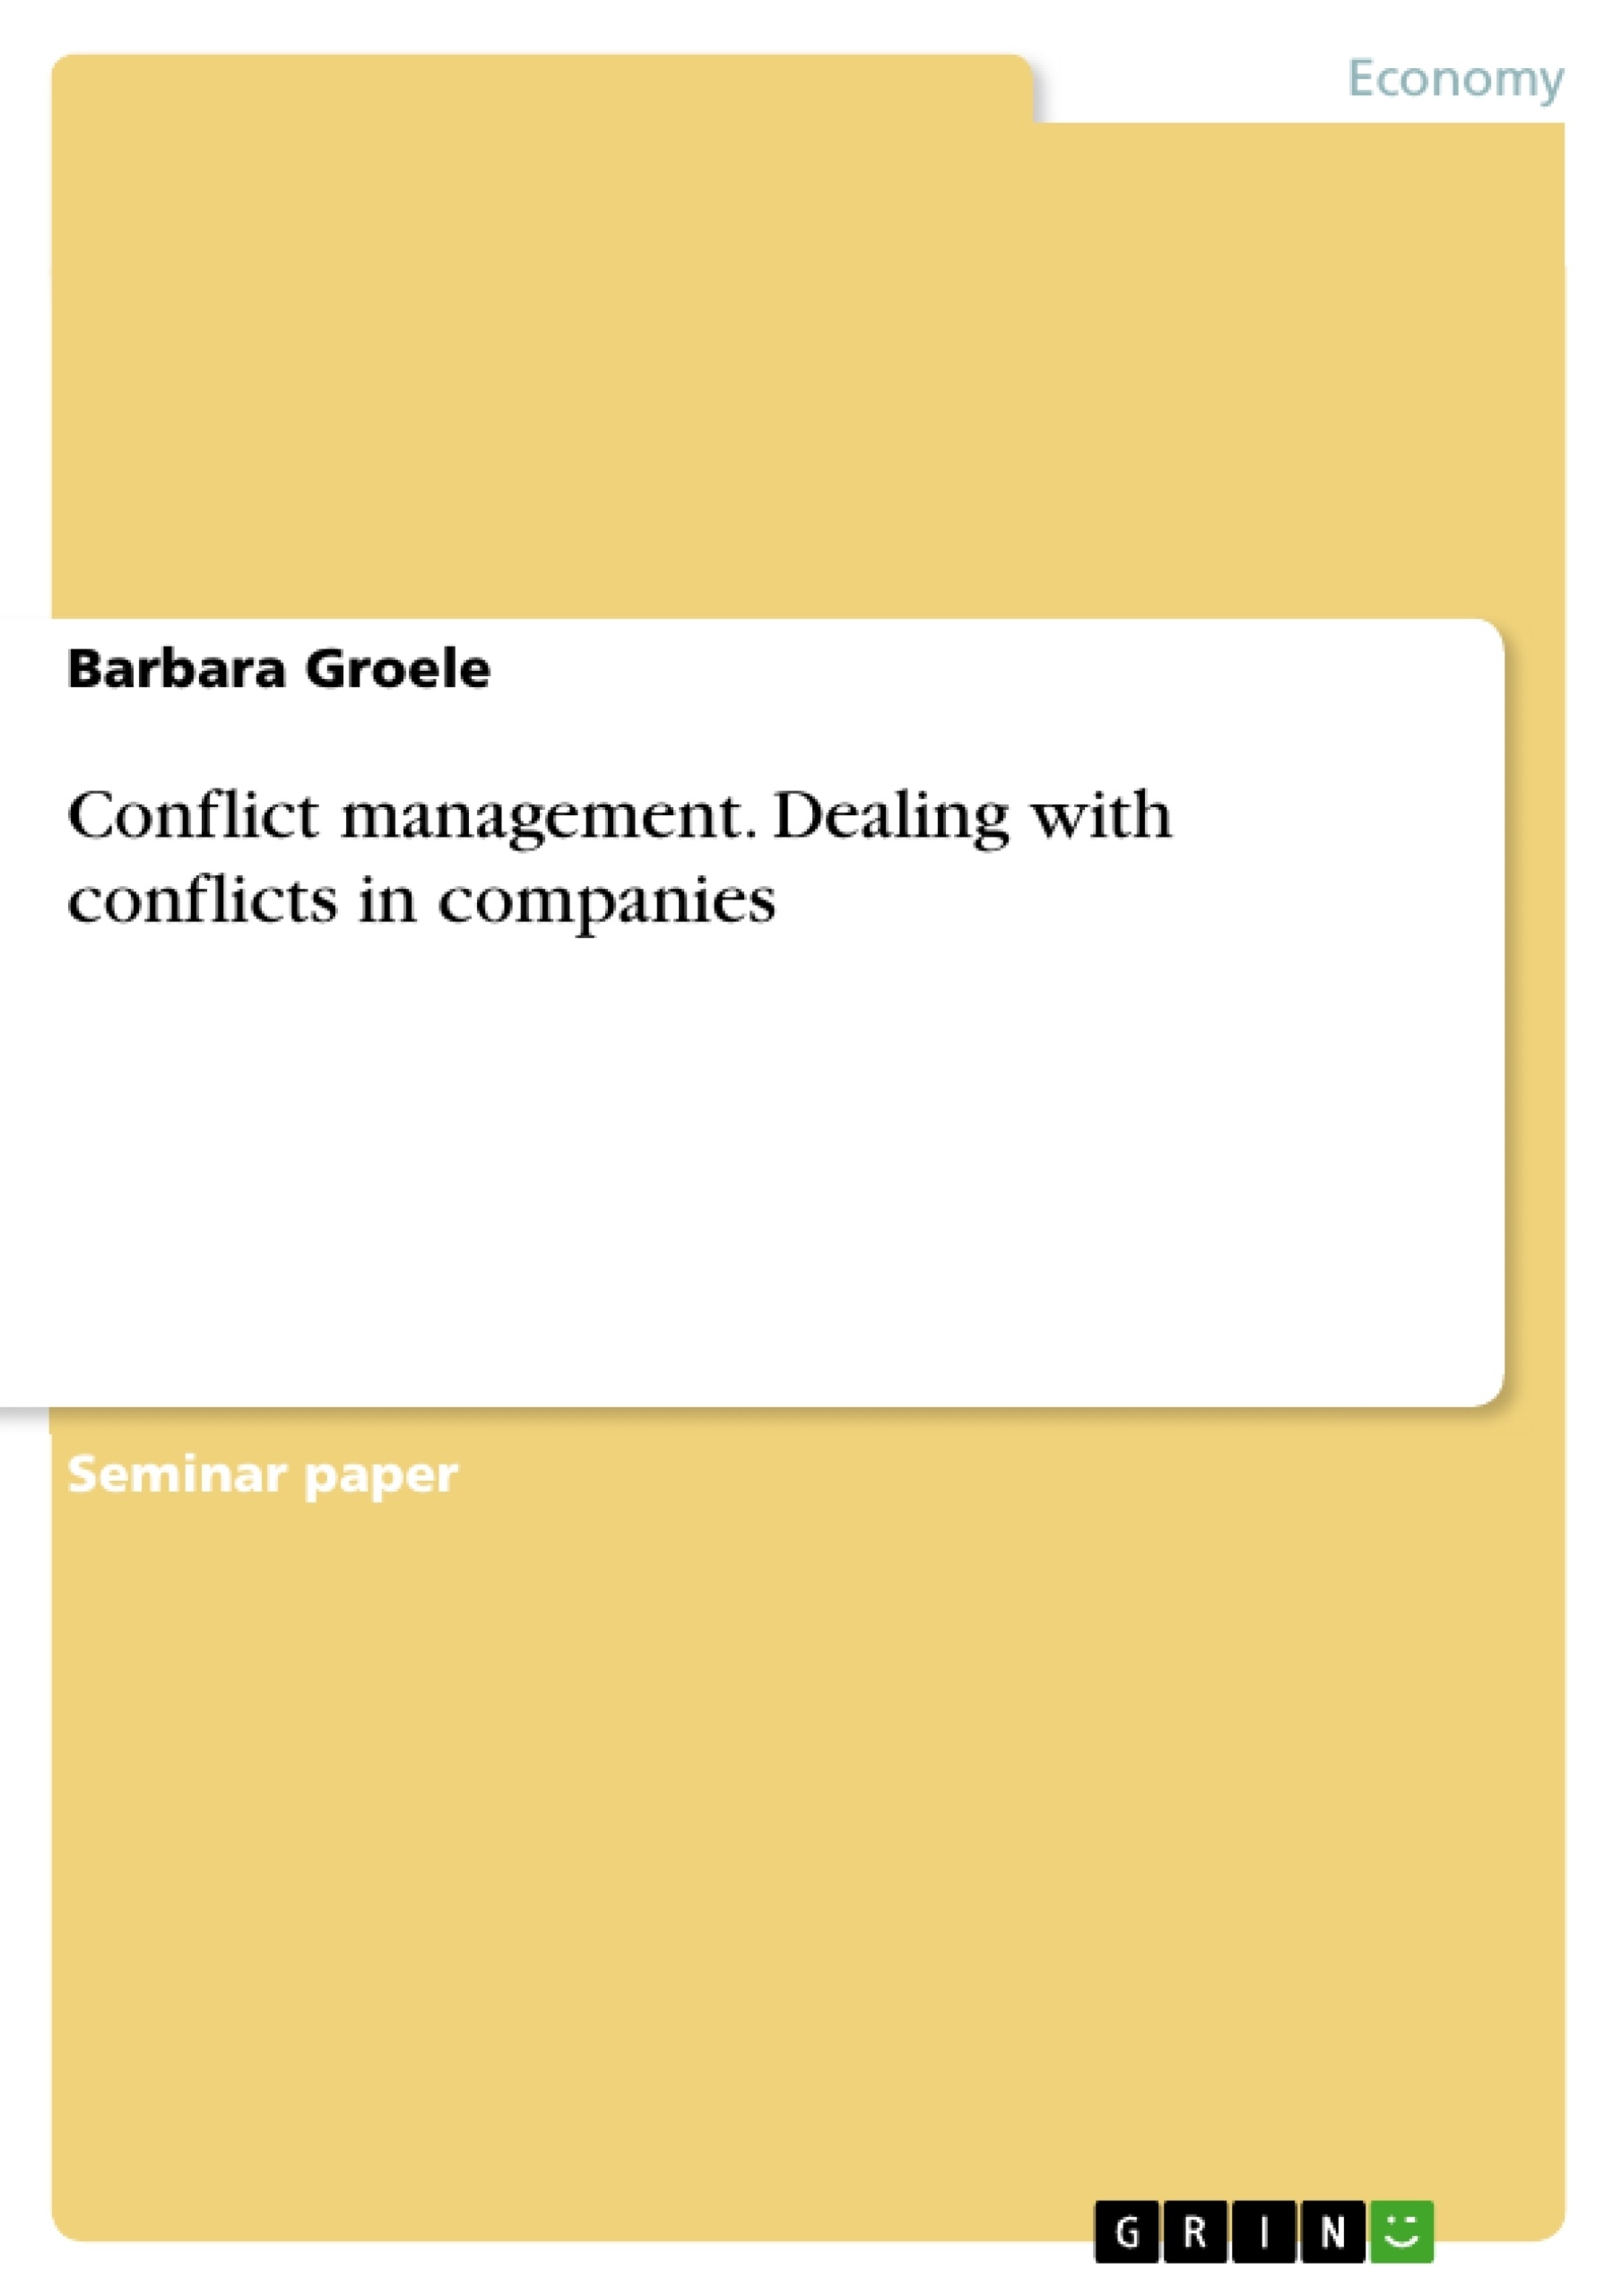 Title: Conflict management. Dealing with conflicts in companies